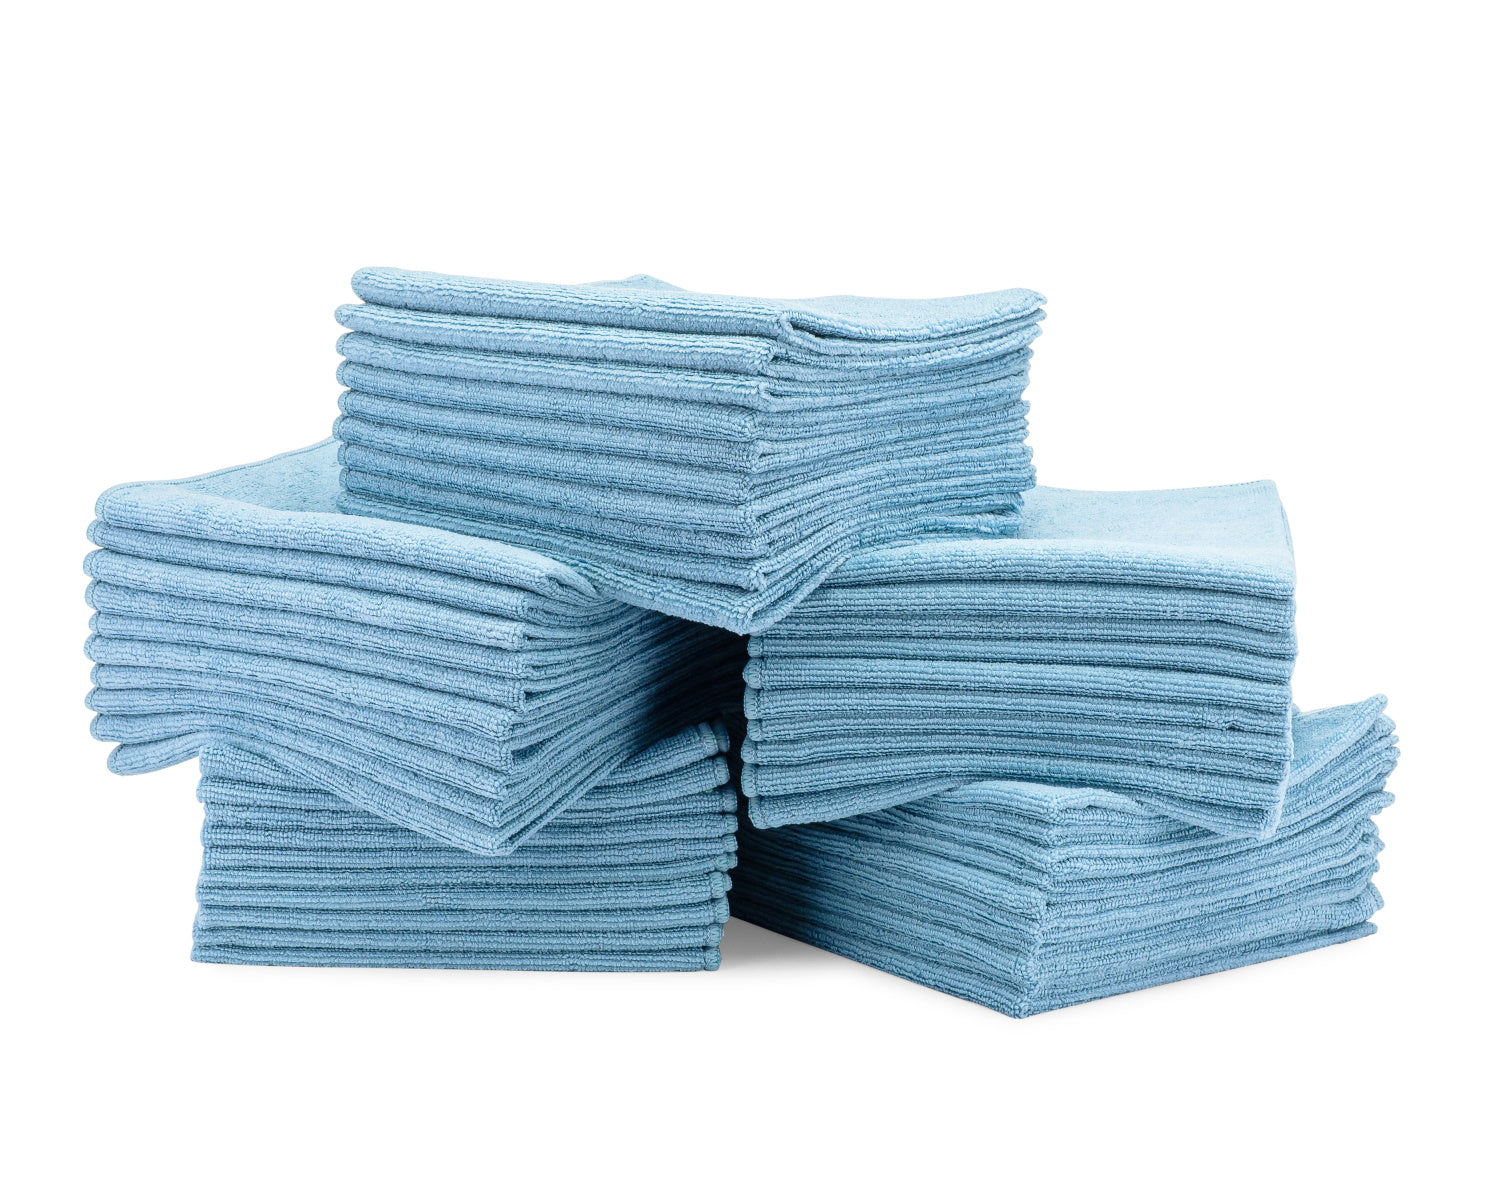 Choosing the right towel for the job - Professional Carwashing